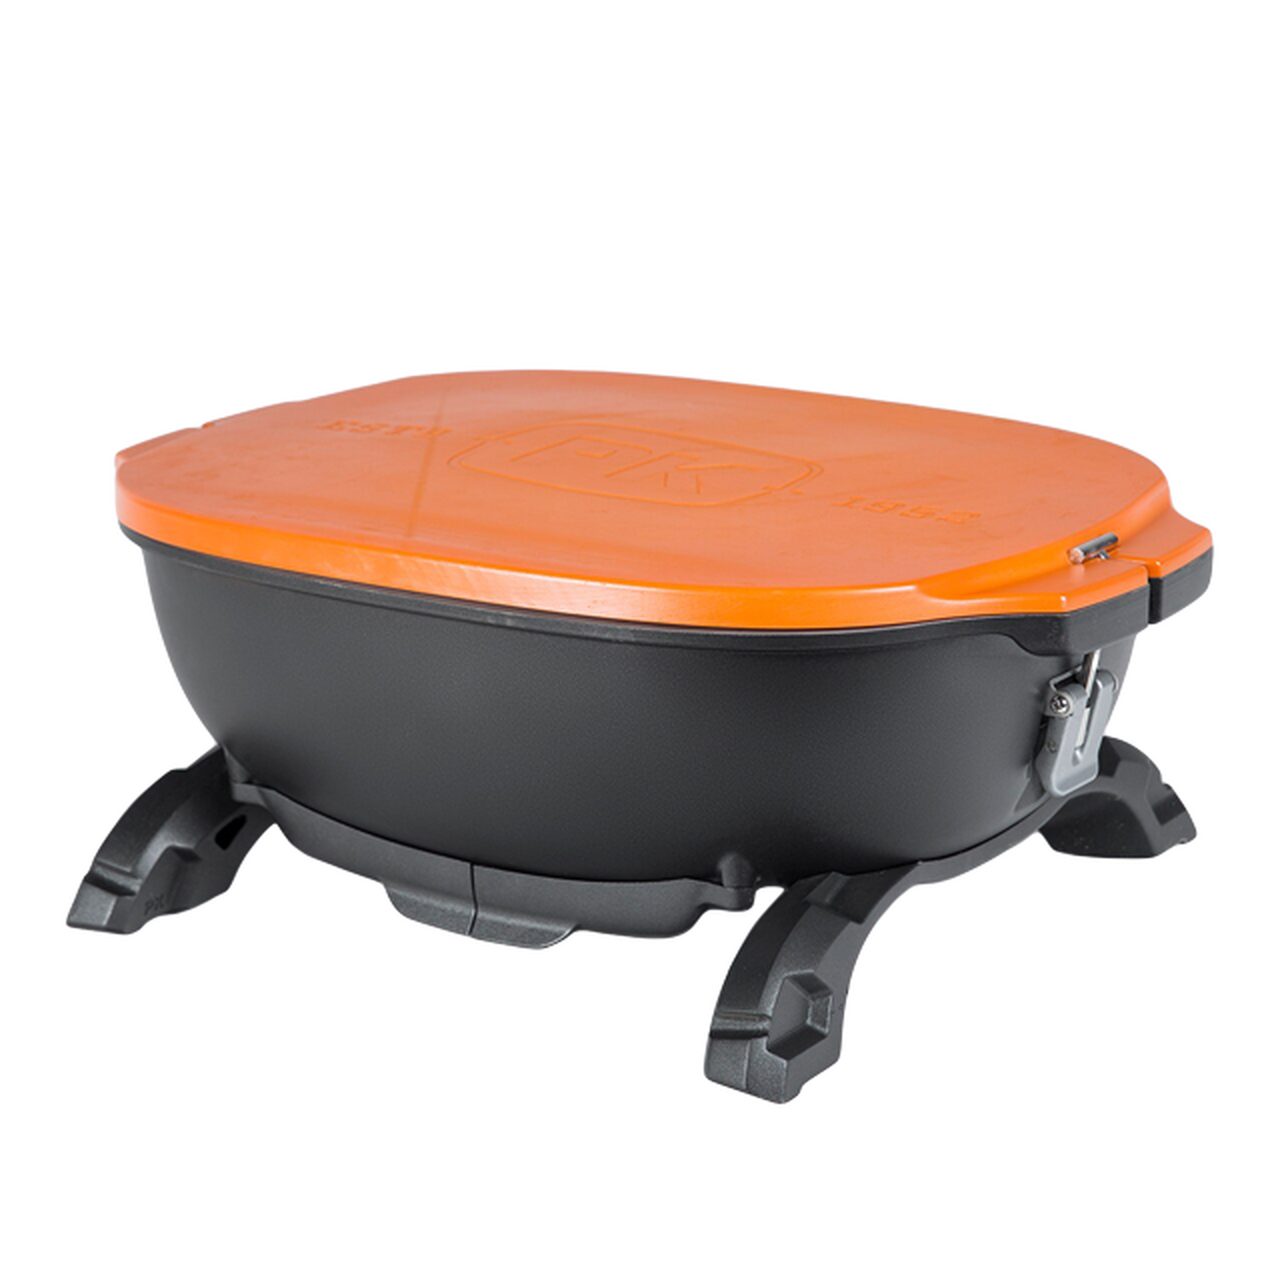 Small charcoal grill with stand and orange lid to protect cooking space